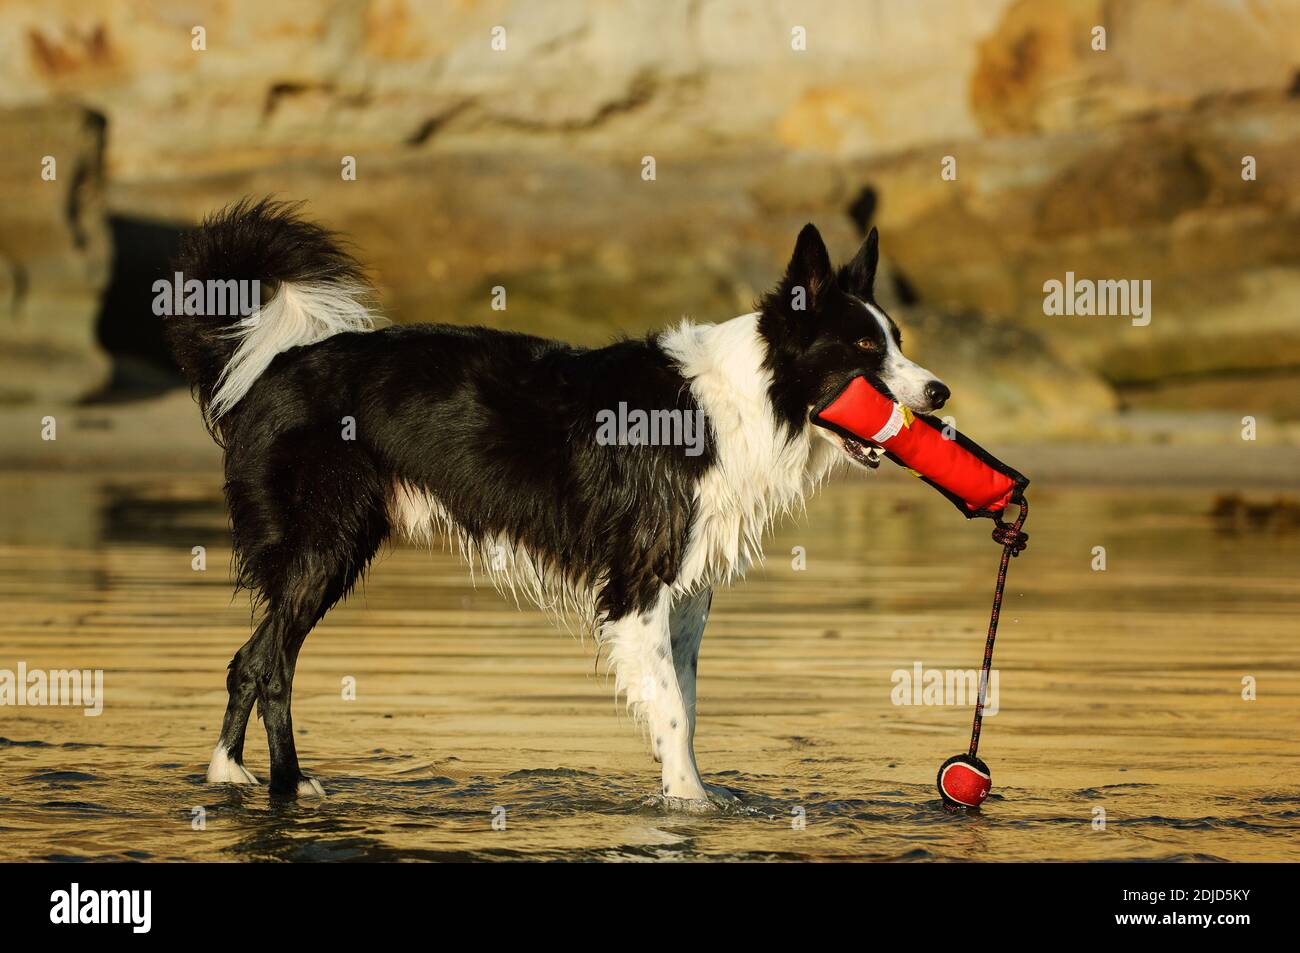 Dog With Red Toy Standing On Sea Shore At Beach Stock Photo